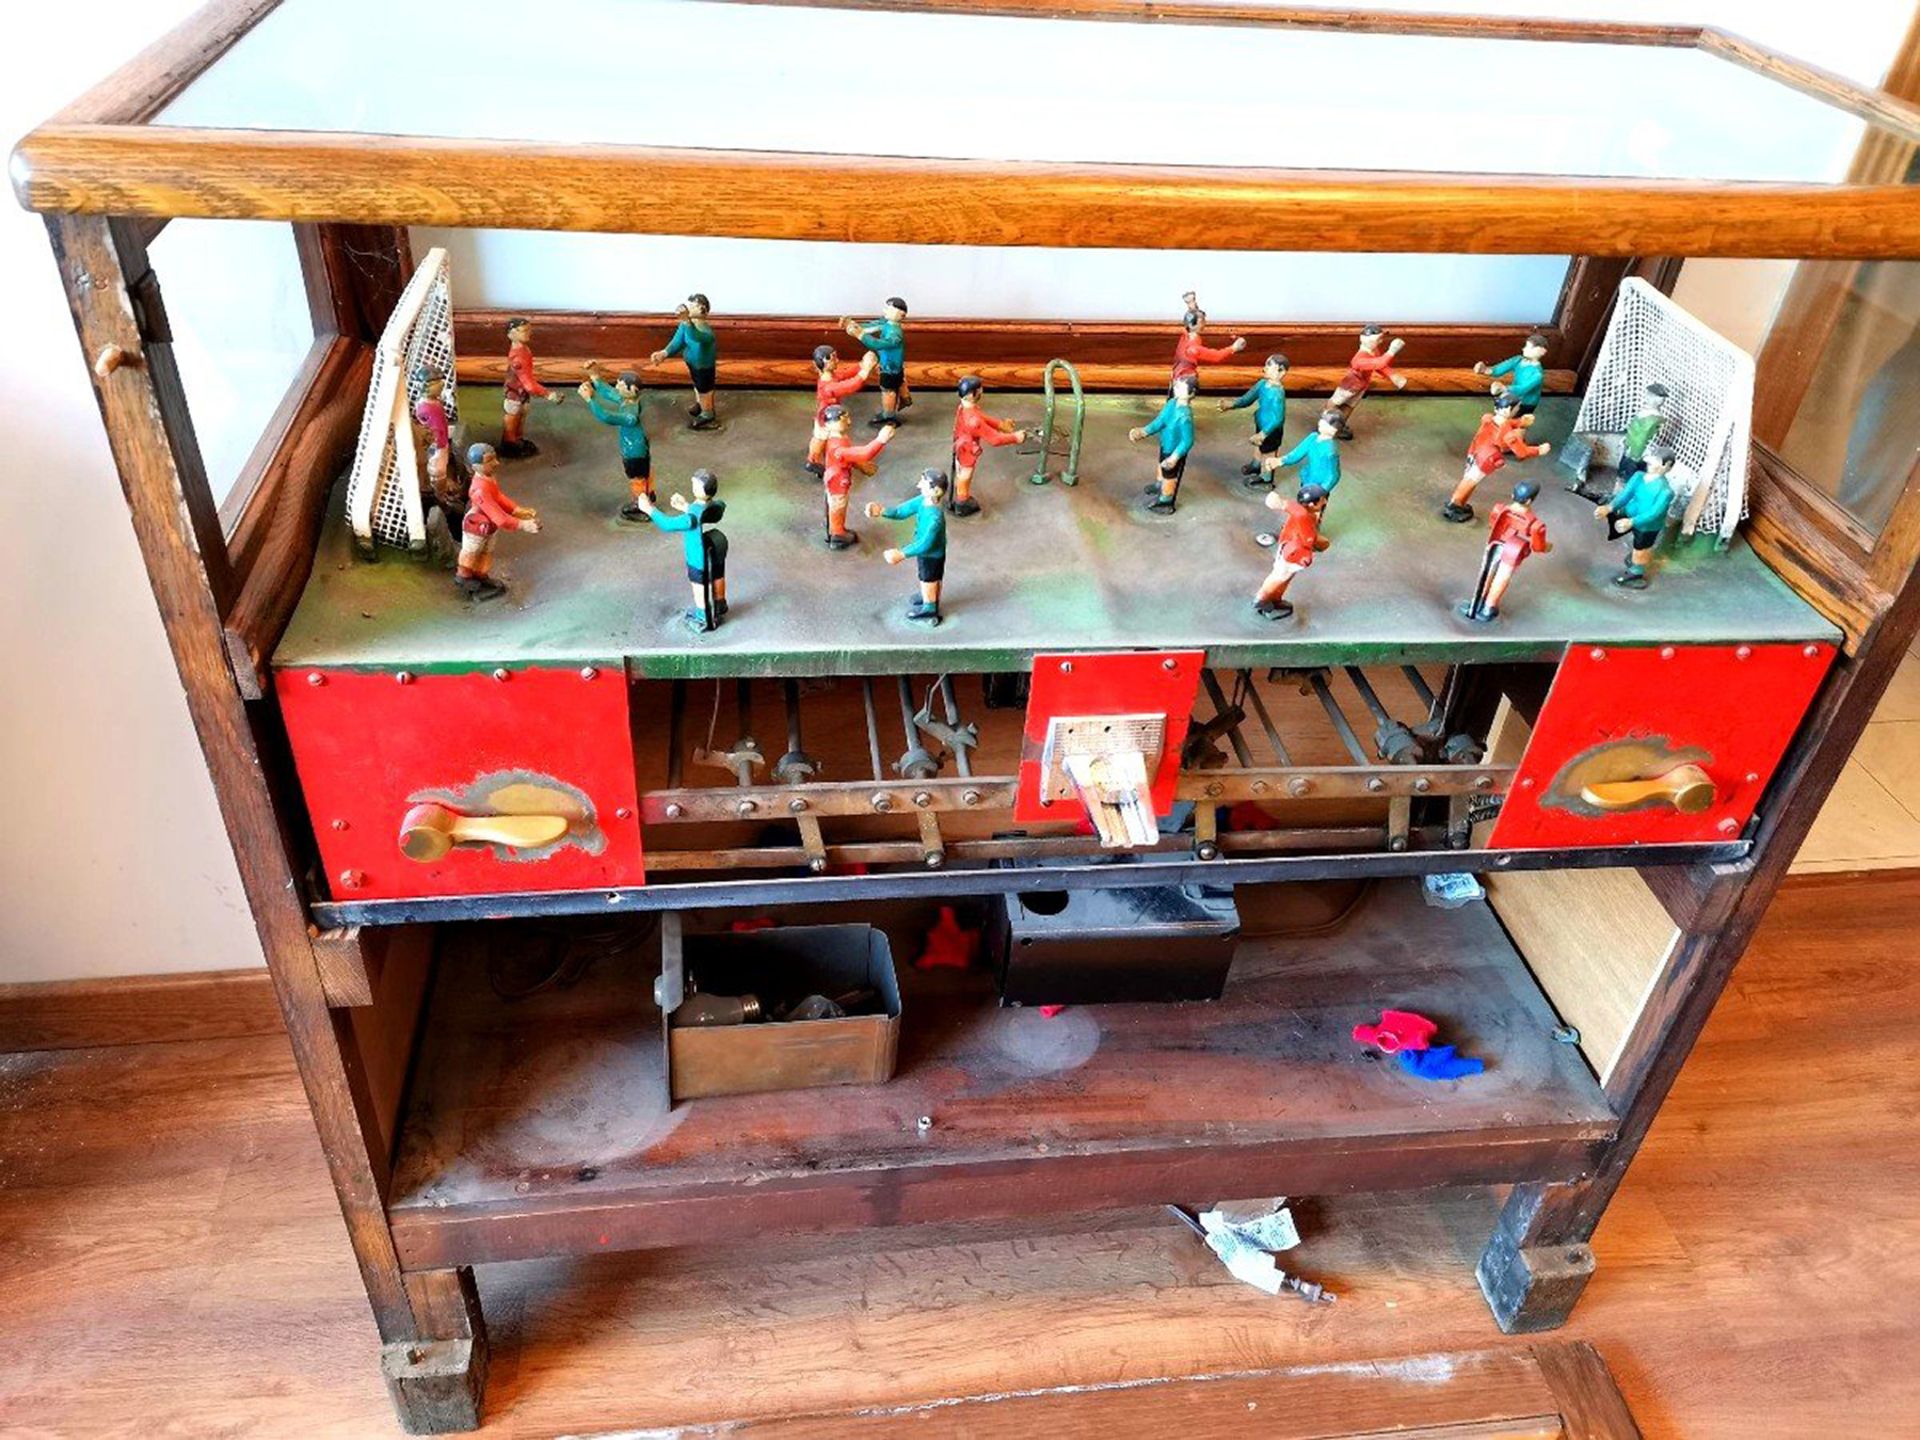 Mechanical football game from the 1930s - Image 8 of 9